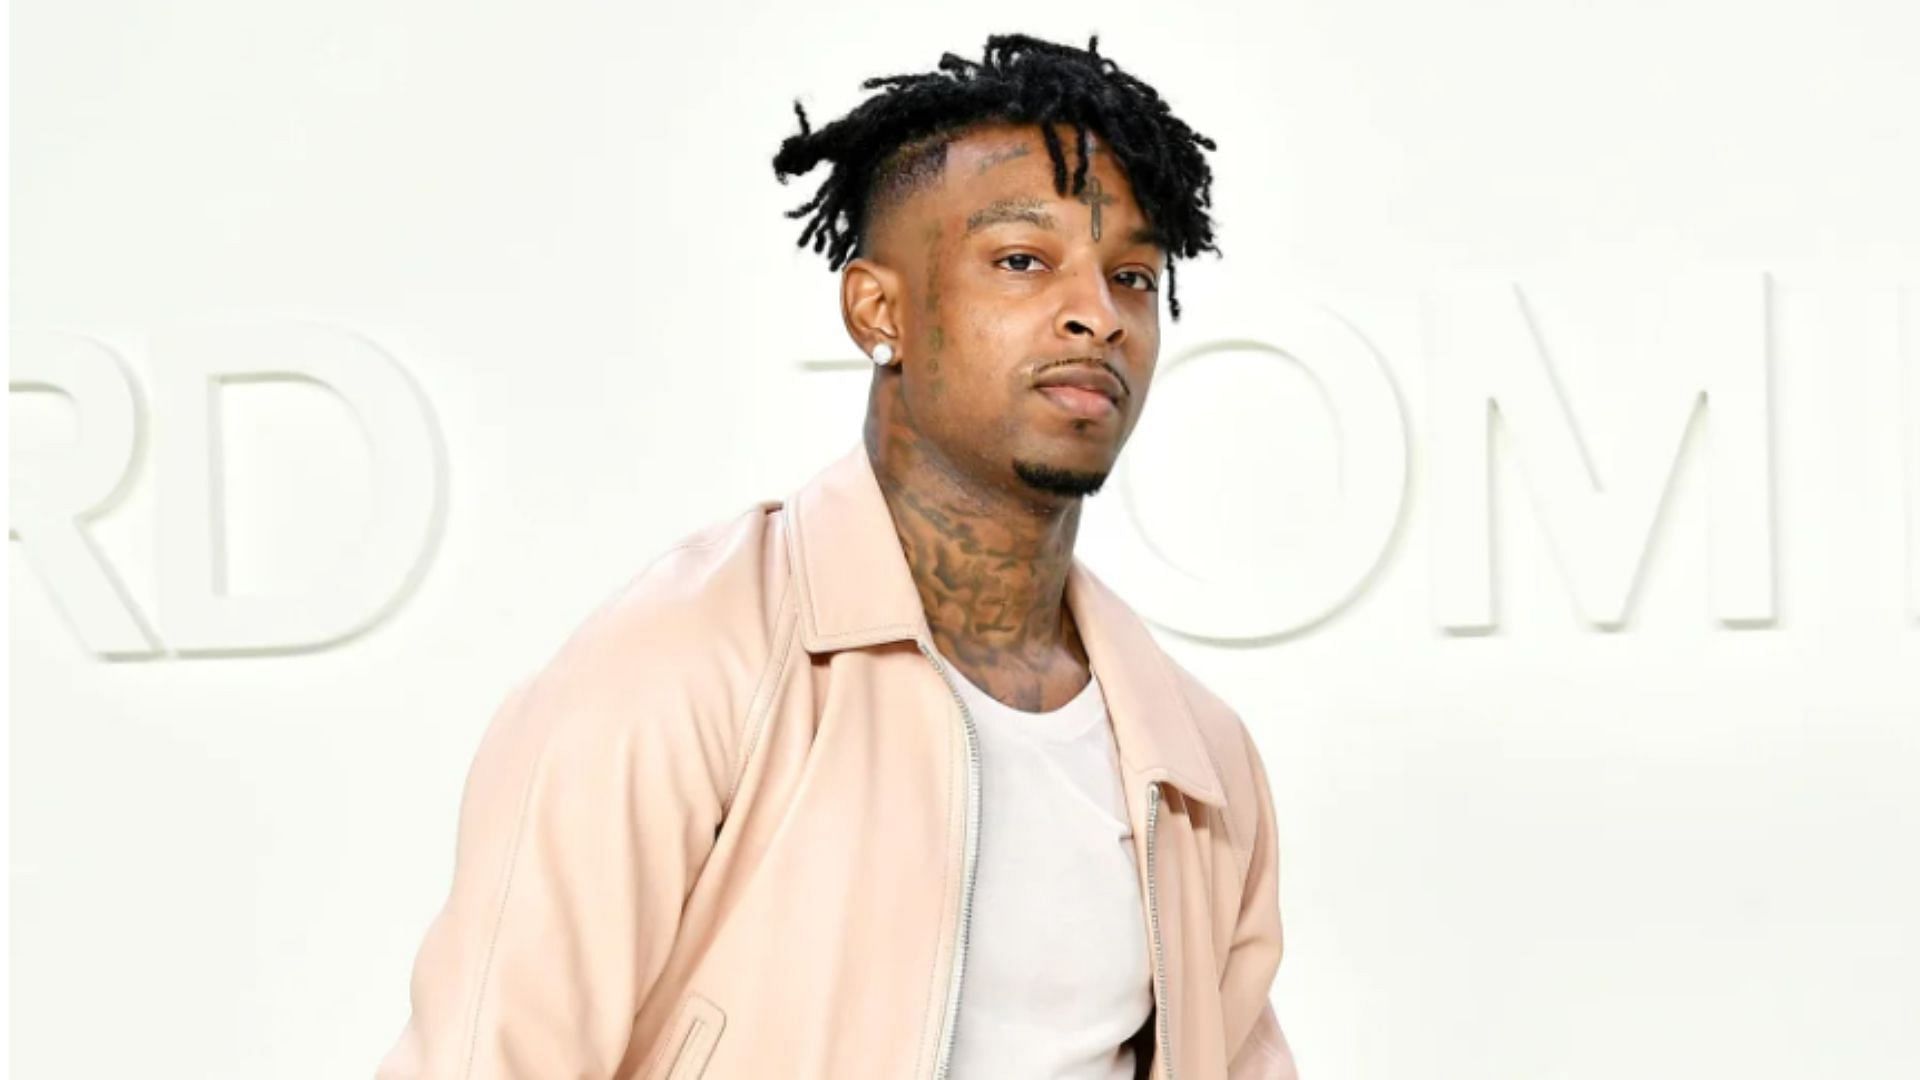 21 Savage recently got into a heated argument on Clubhouse. (Image via Getty)